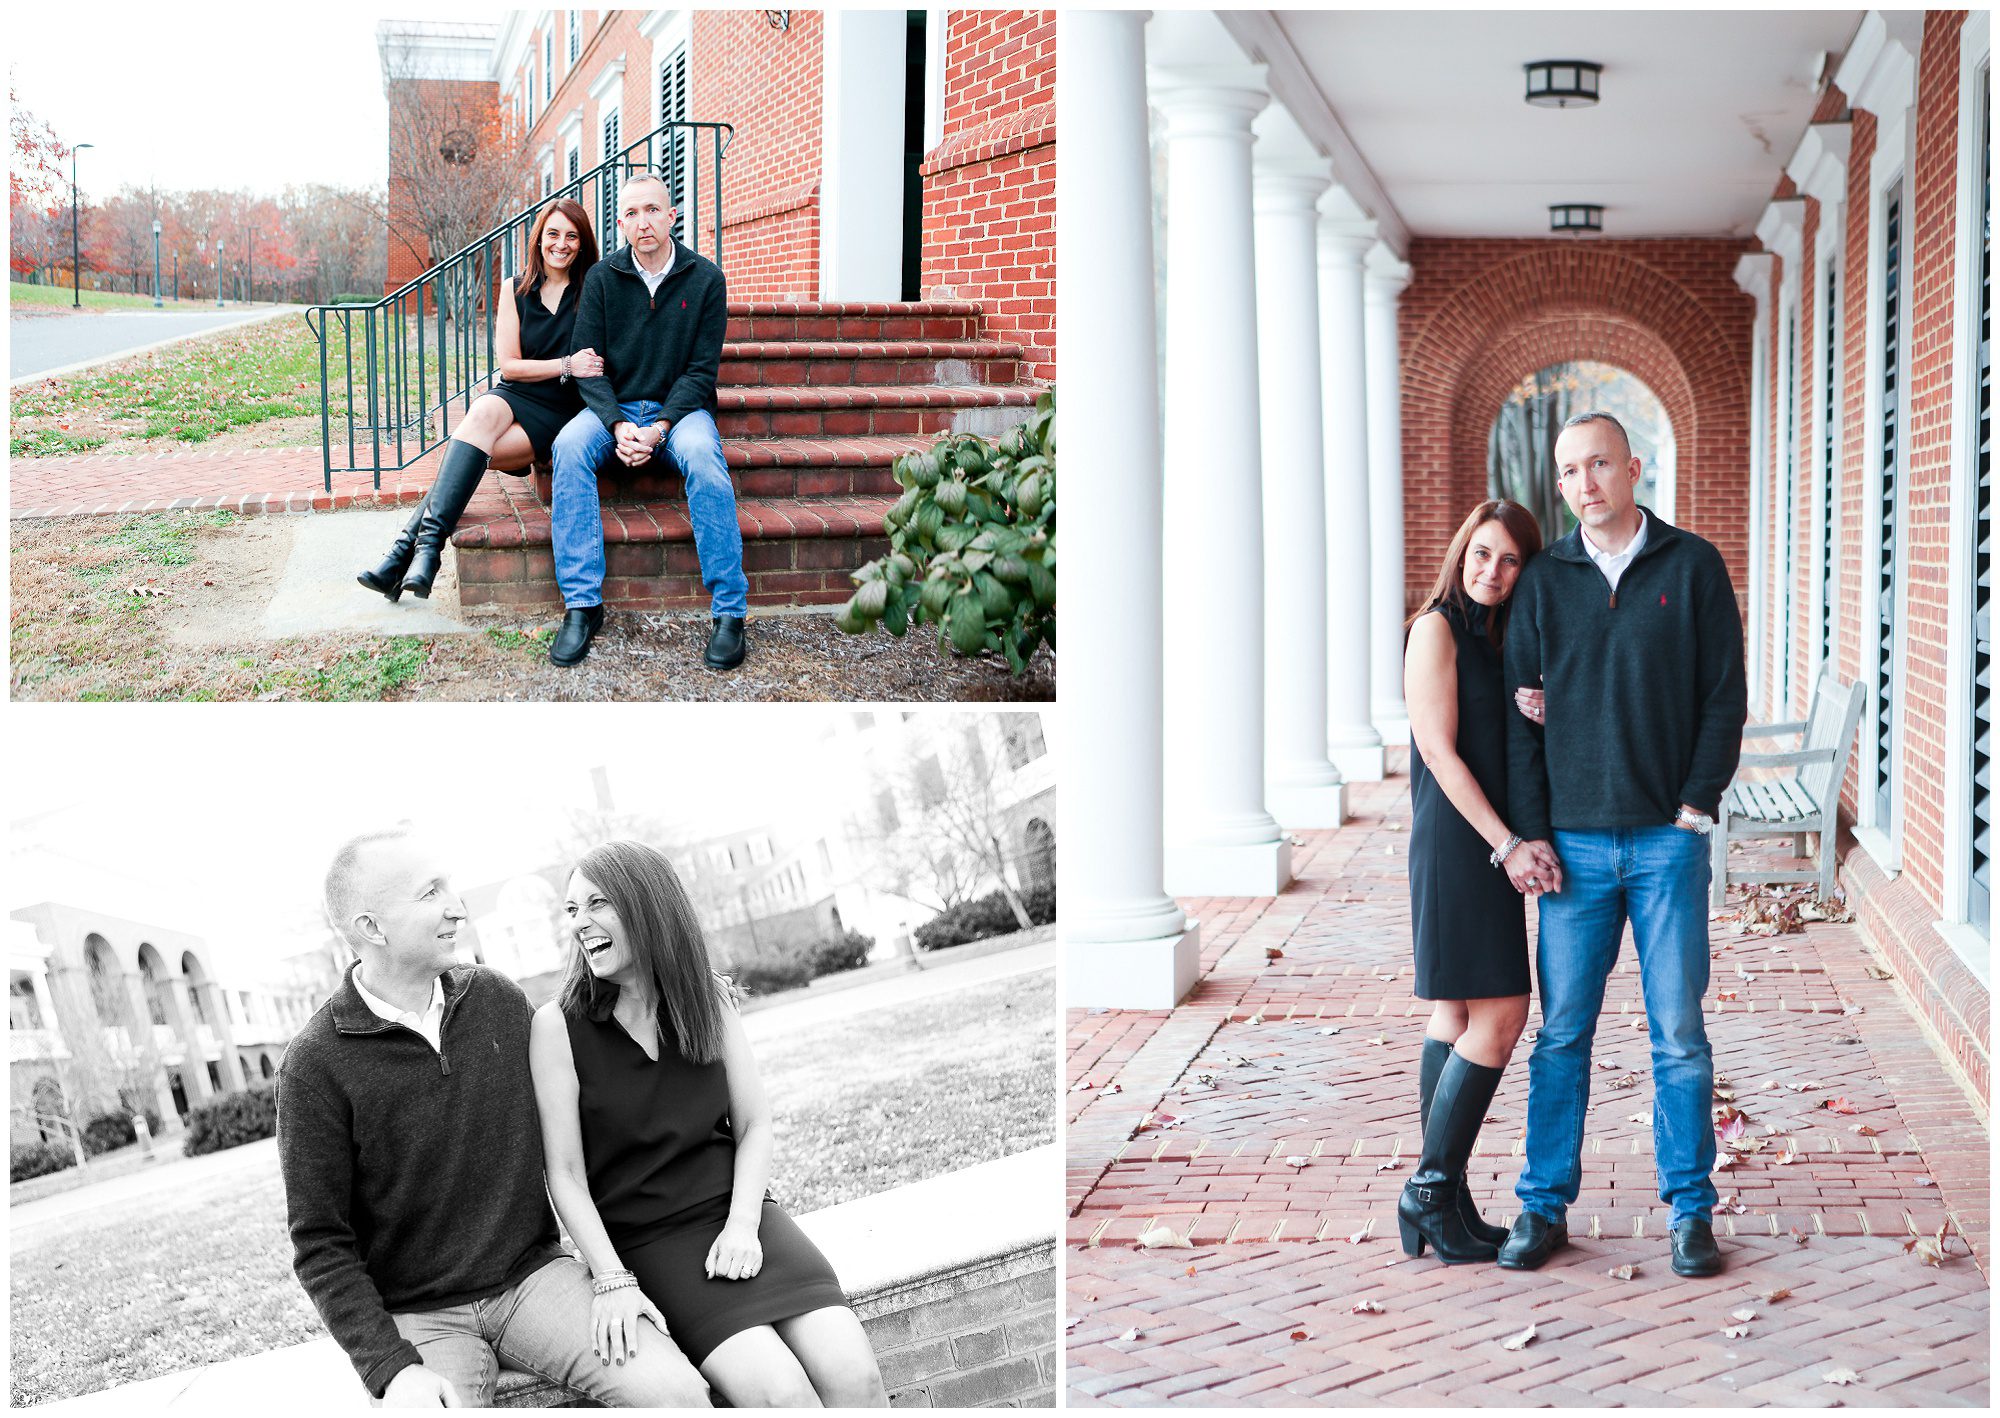 Charlottesville family portraits uva darden grounds fall pictures photographer university of virginia